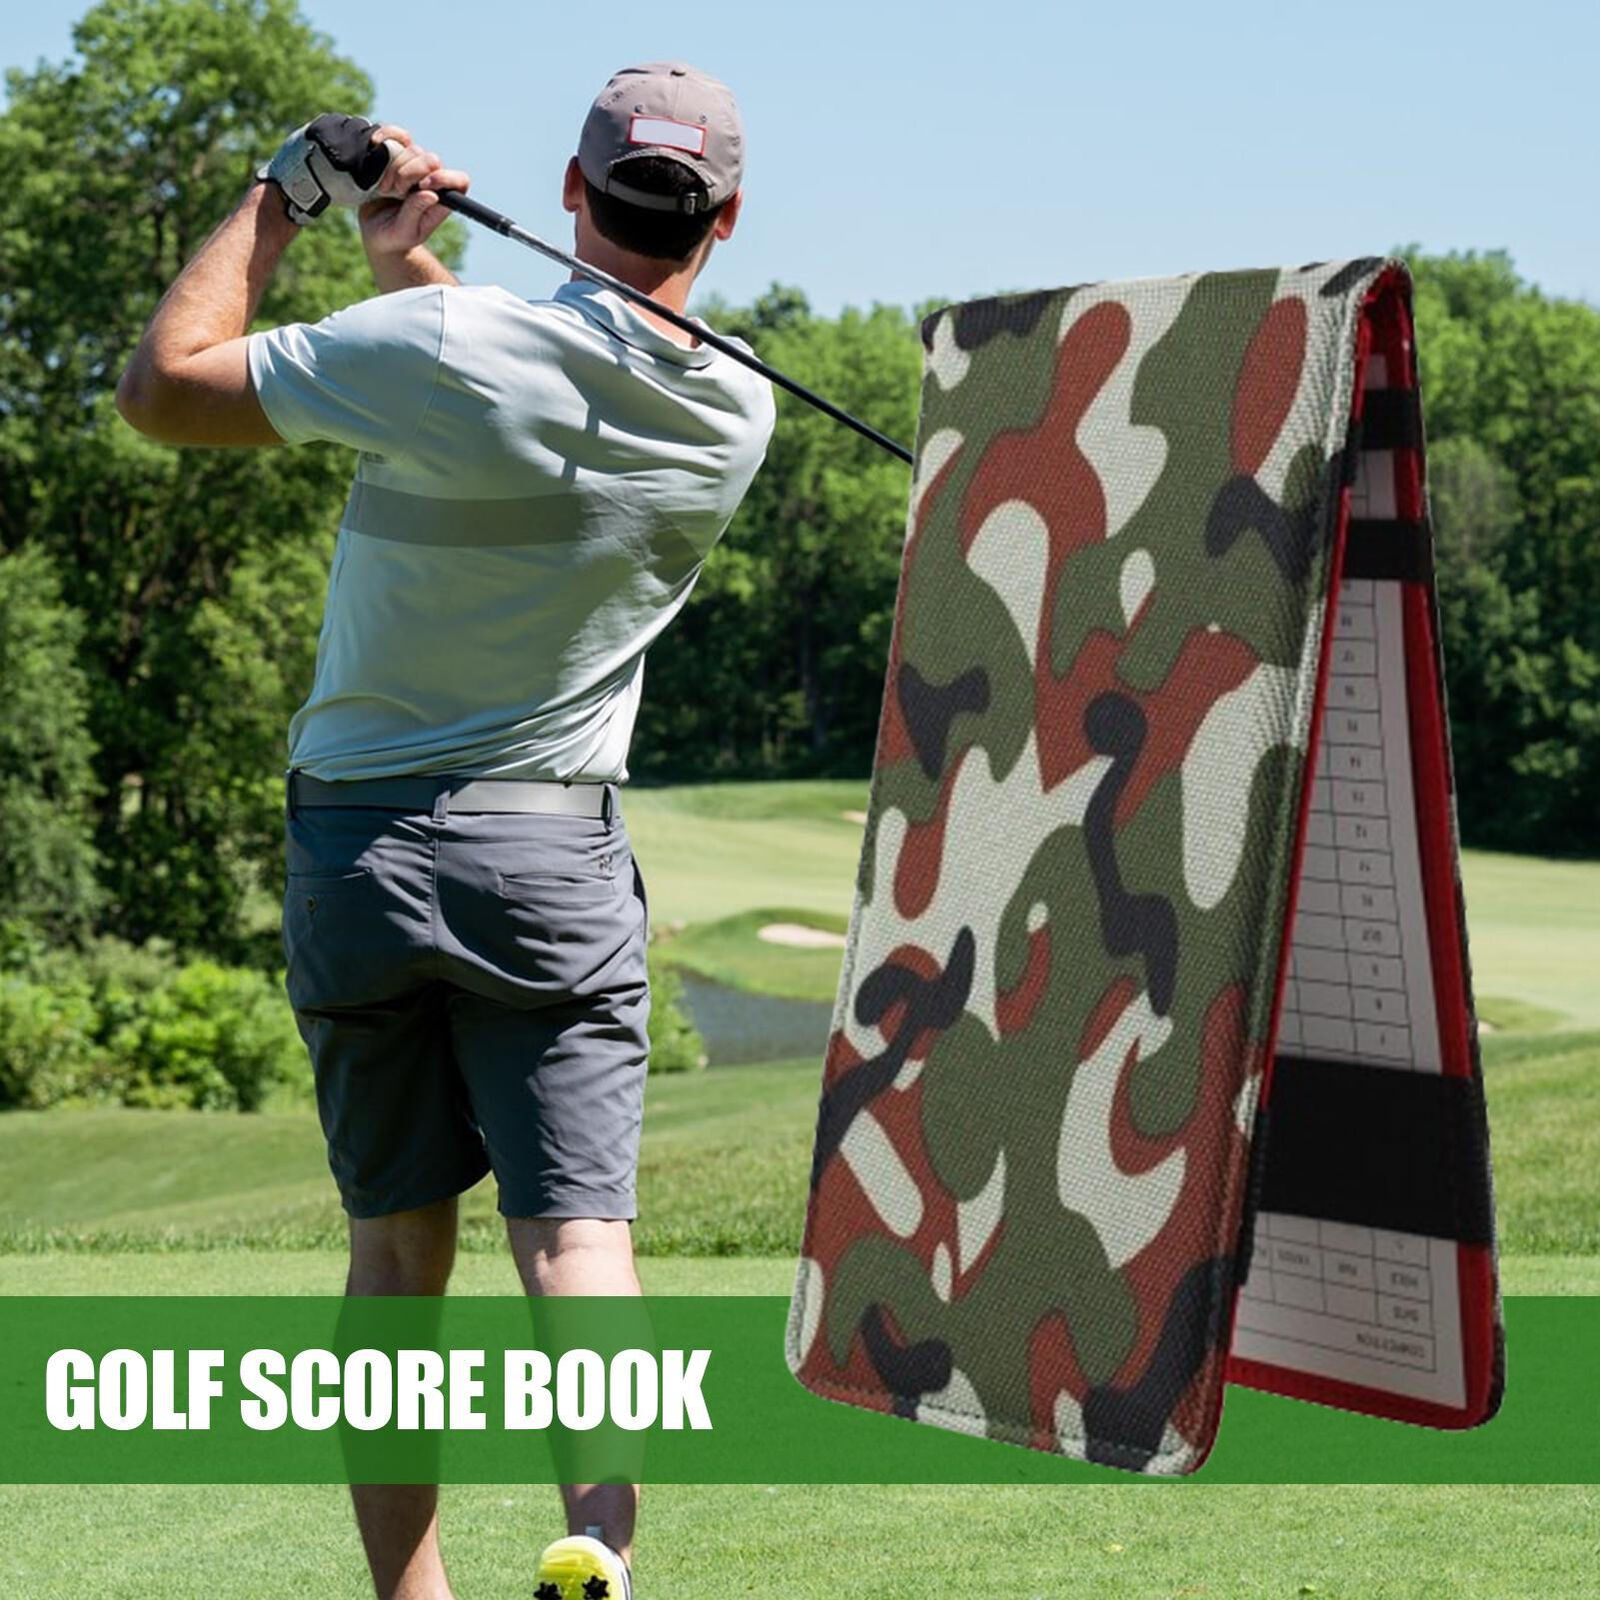 Golf Score Book Golf Journal Notebook with Pencil Oxford Cloth Club capable Unbranded does not apply - фотография #12